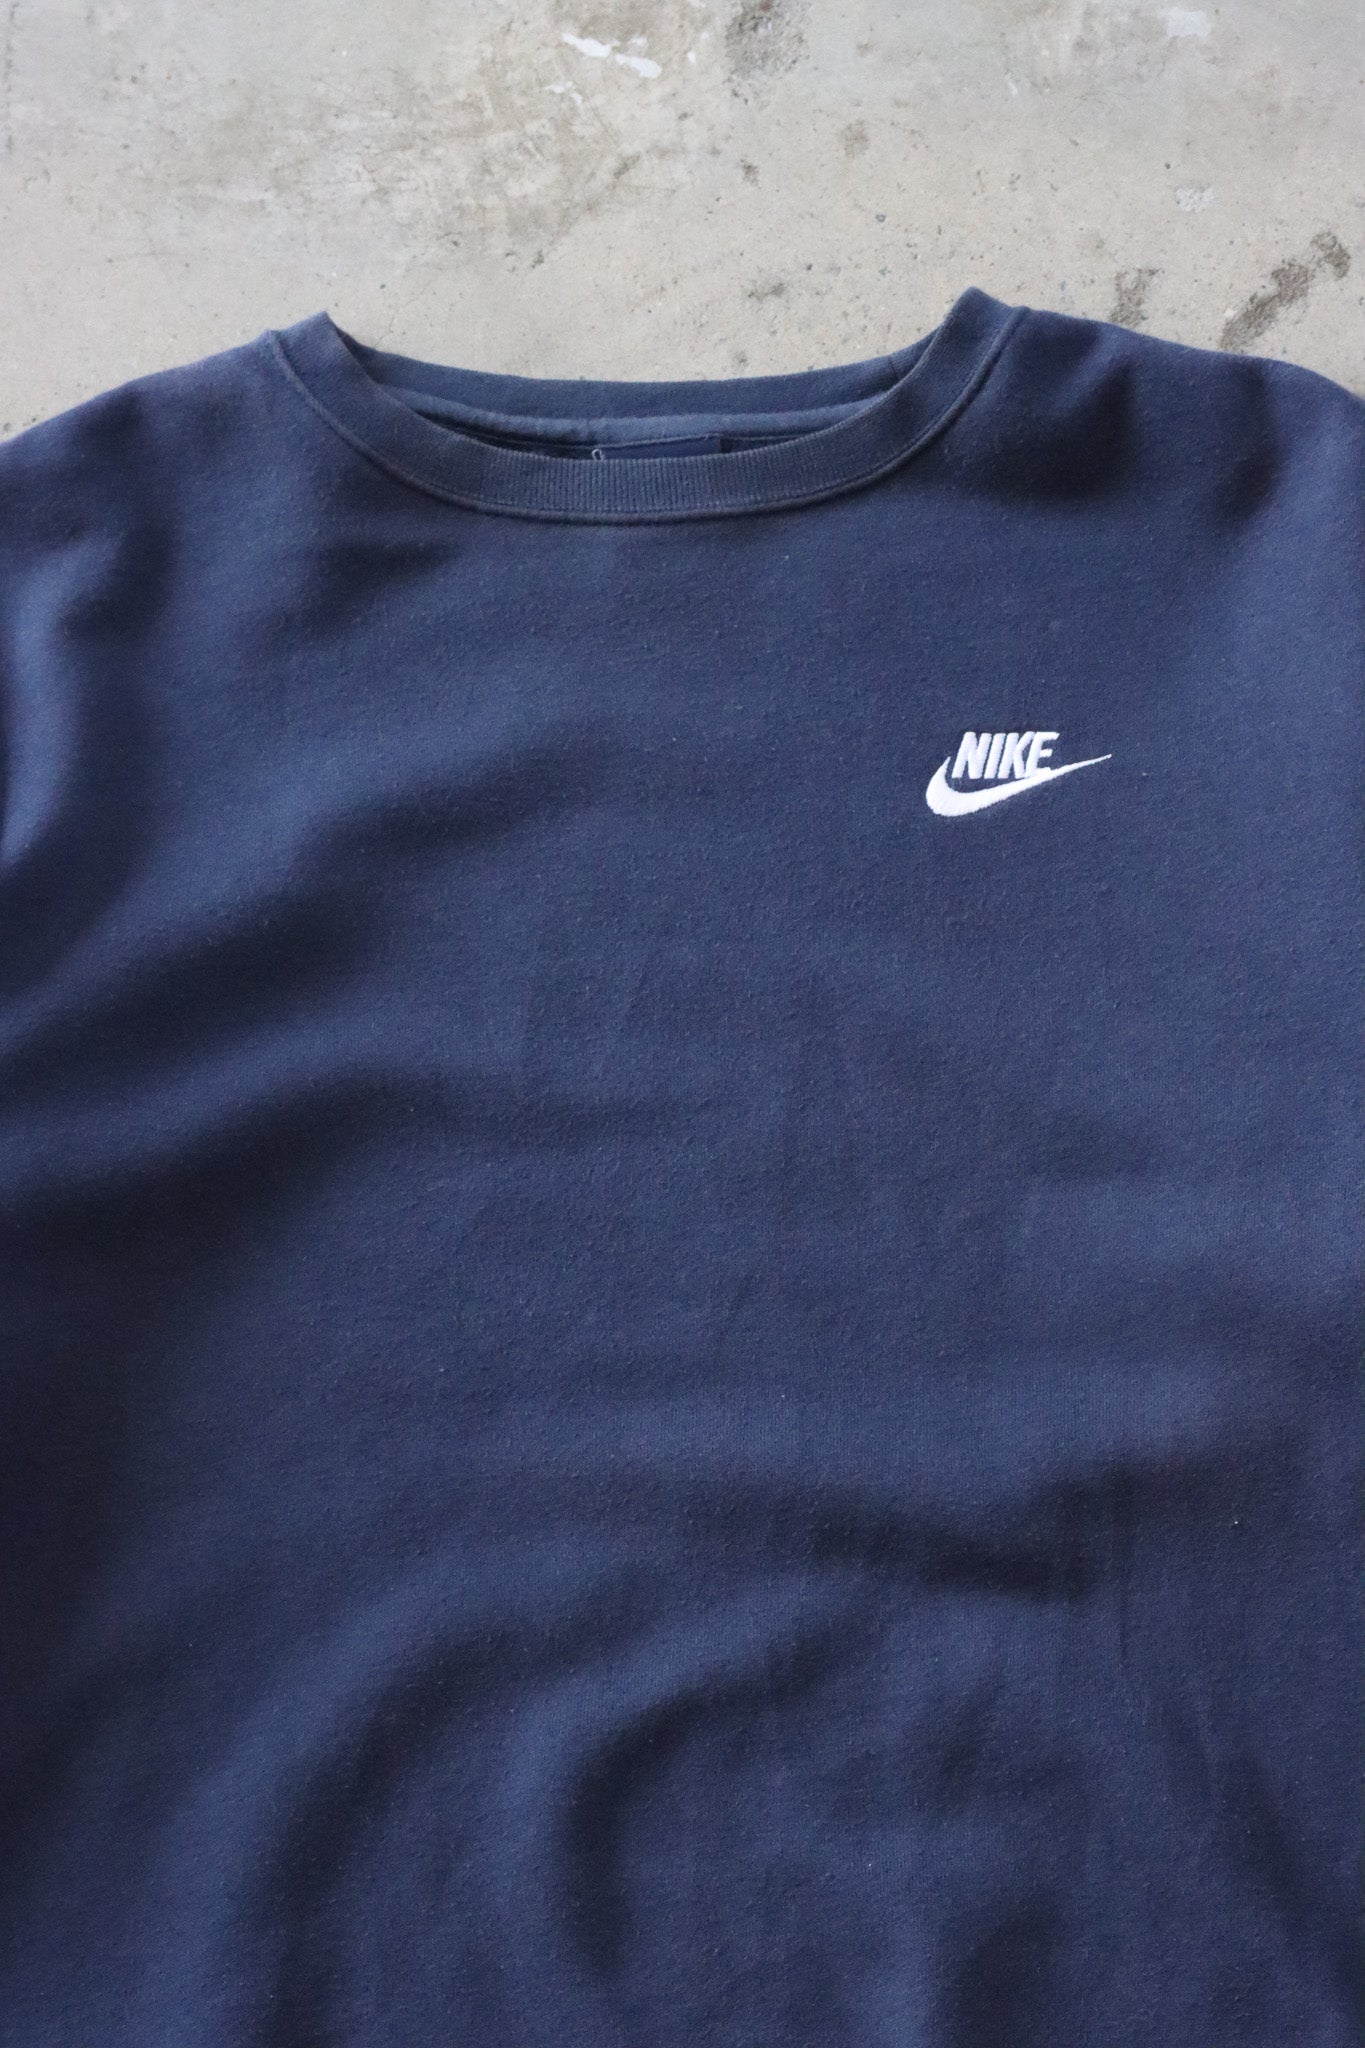 Vintage Nike Sweater Small